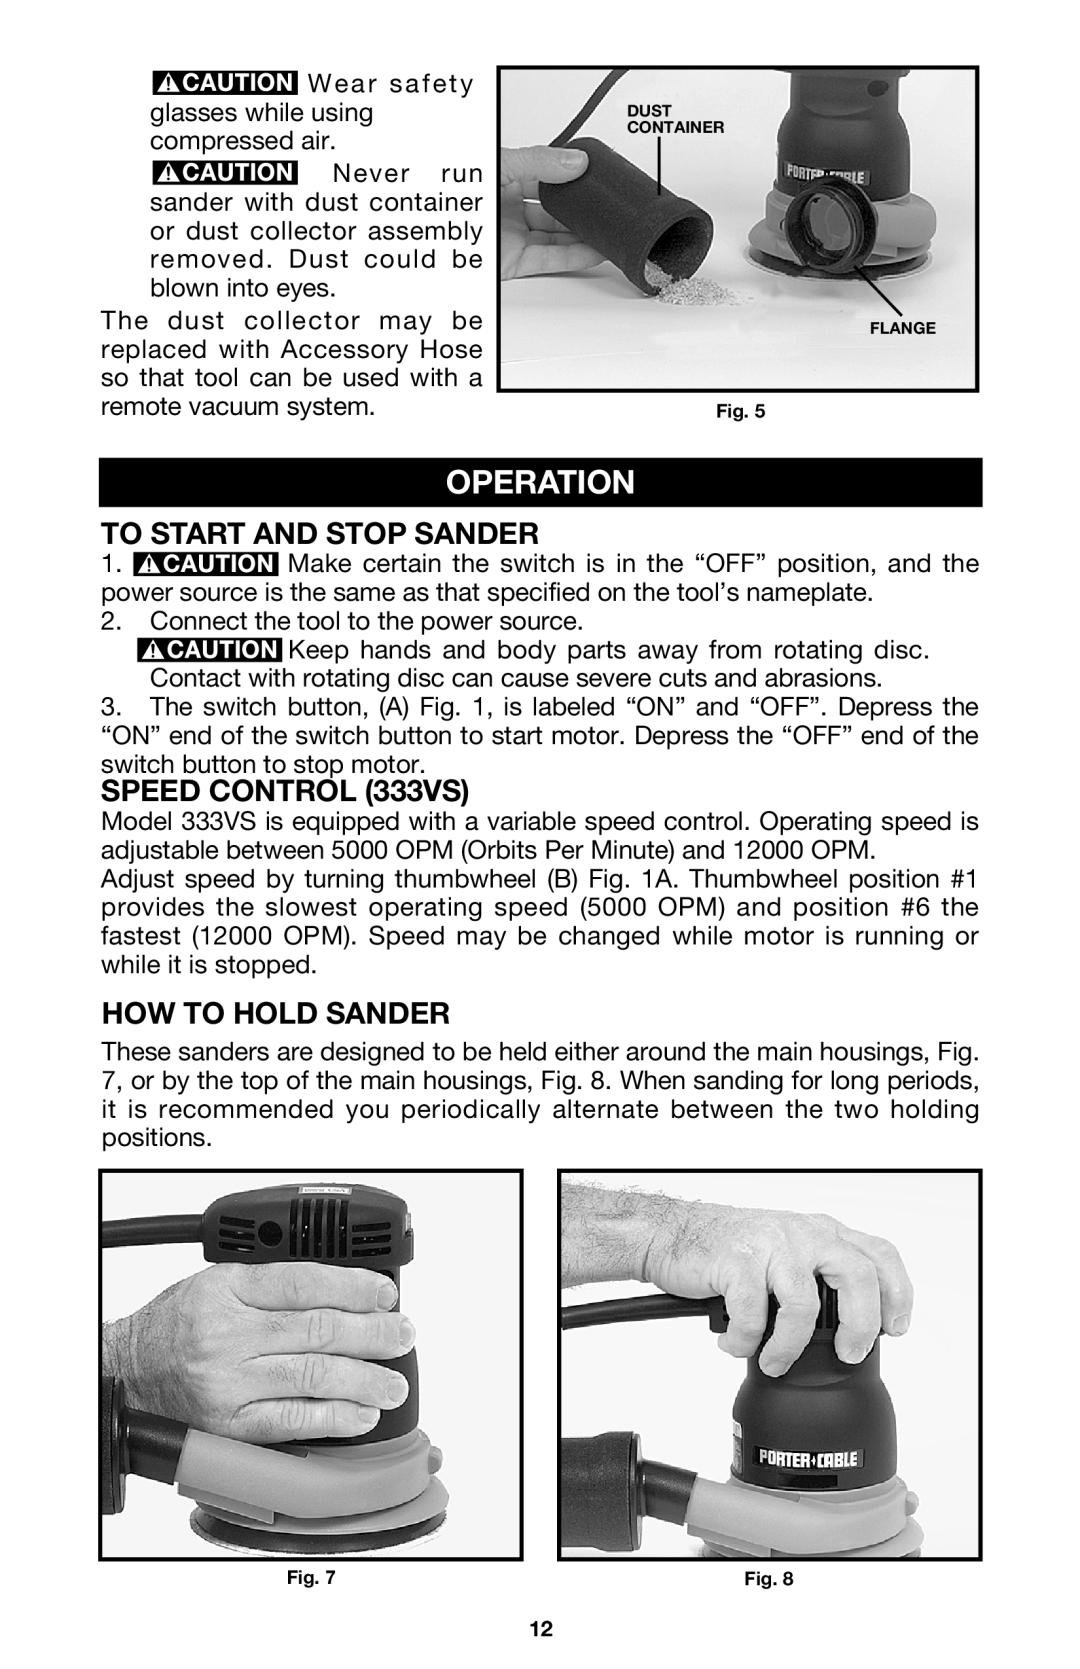 Porter-Cable instruction manual Operation, To Start And Stop Sander, SPEED CONTROL 333VS, How To Hold Sander 